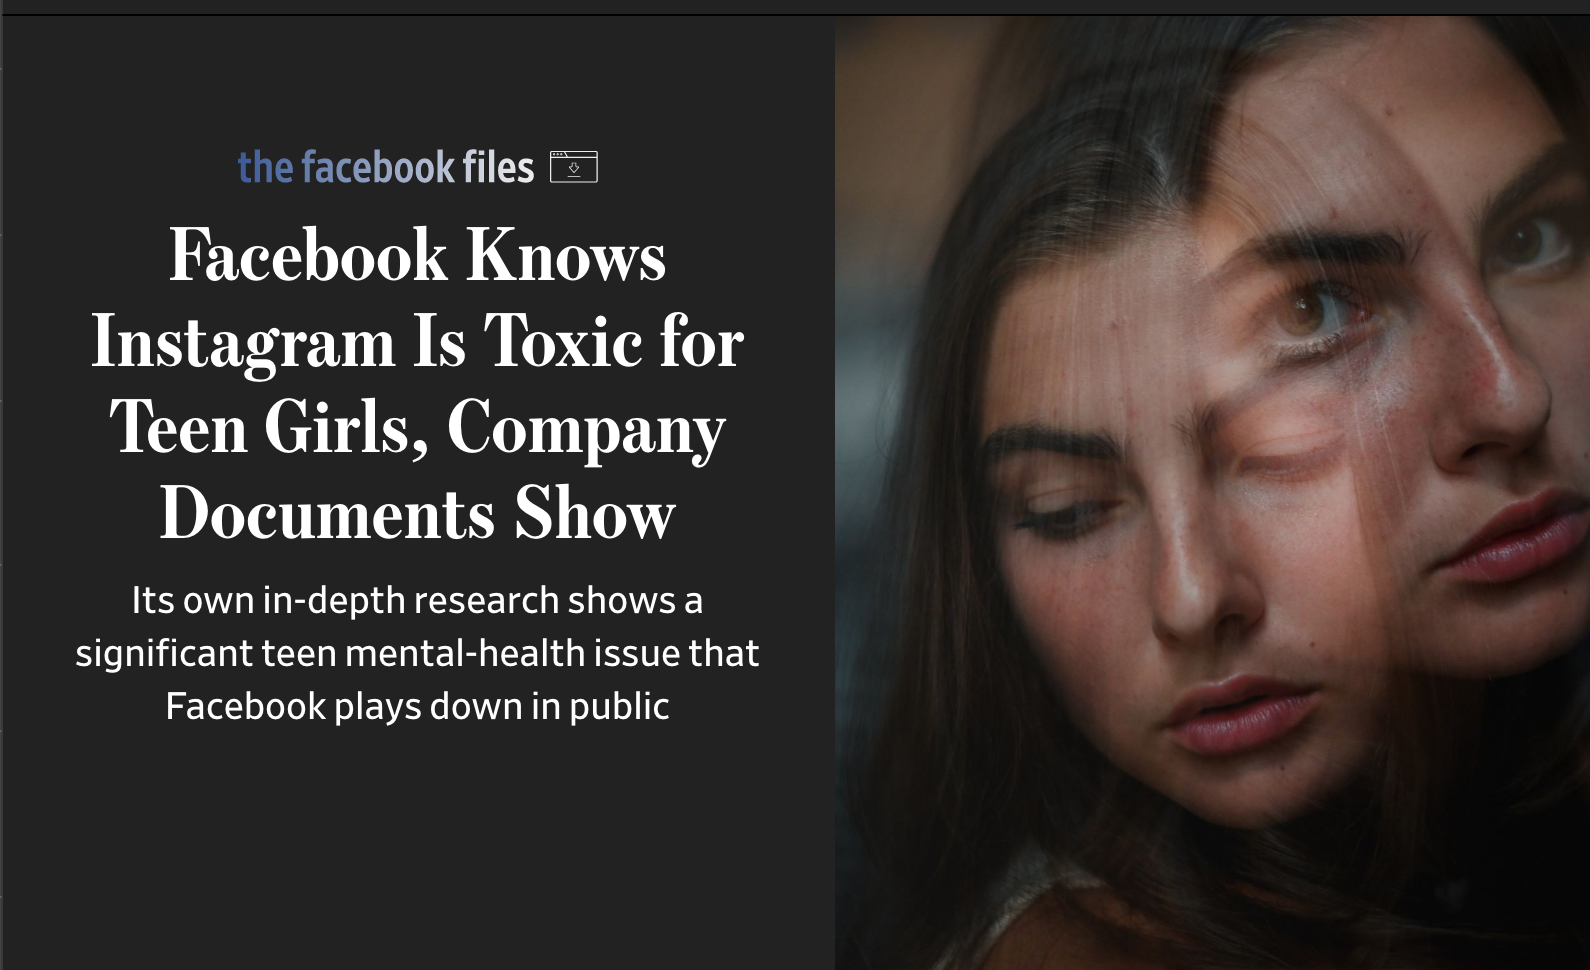 What we can learn from Wall Street Journal’s Article: “Facebook Knows Instagram Is Toxic for Teen Girls, Company Documents Show?”